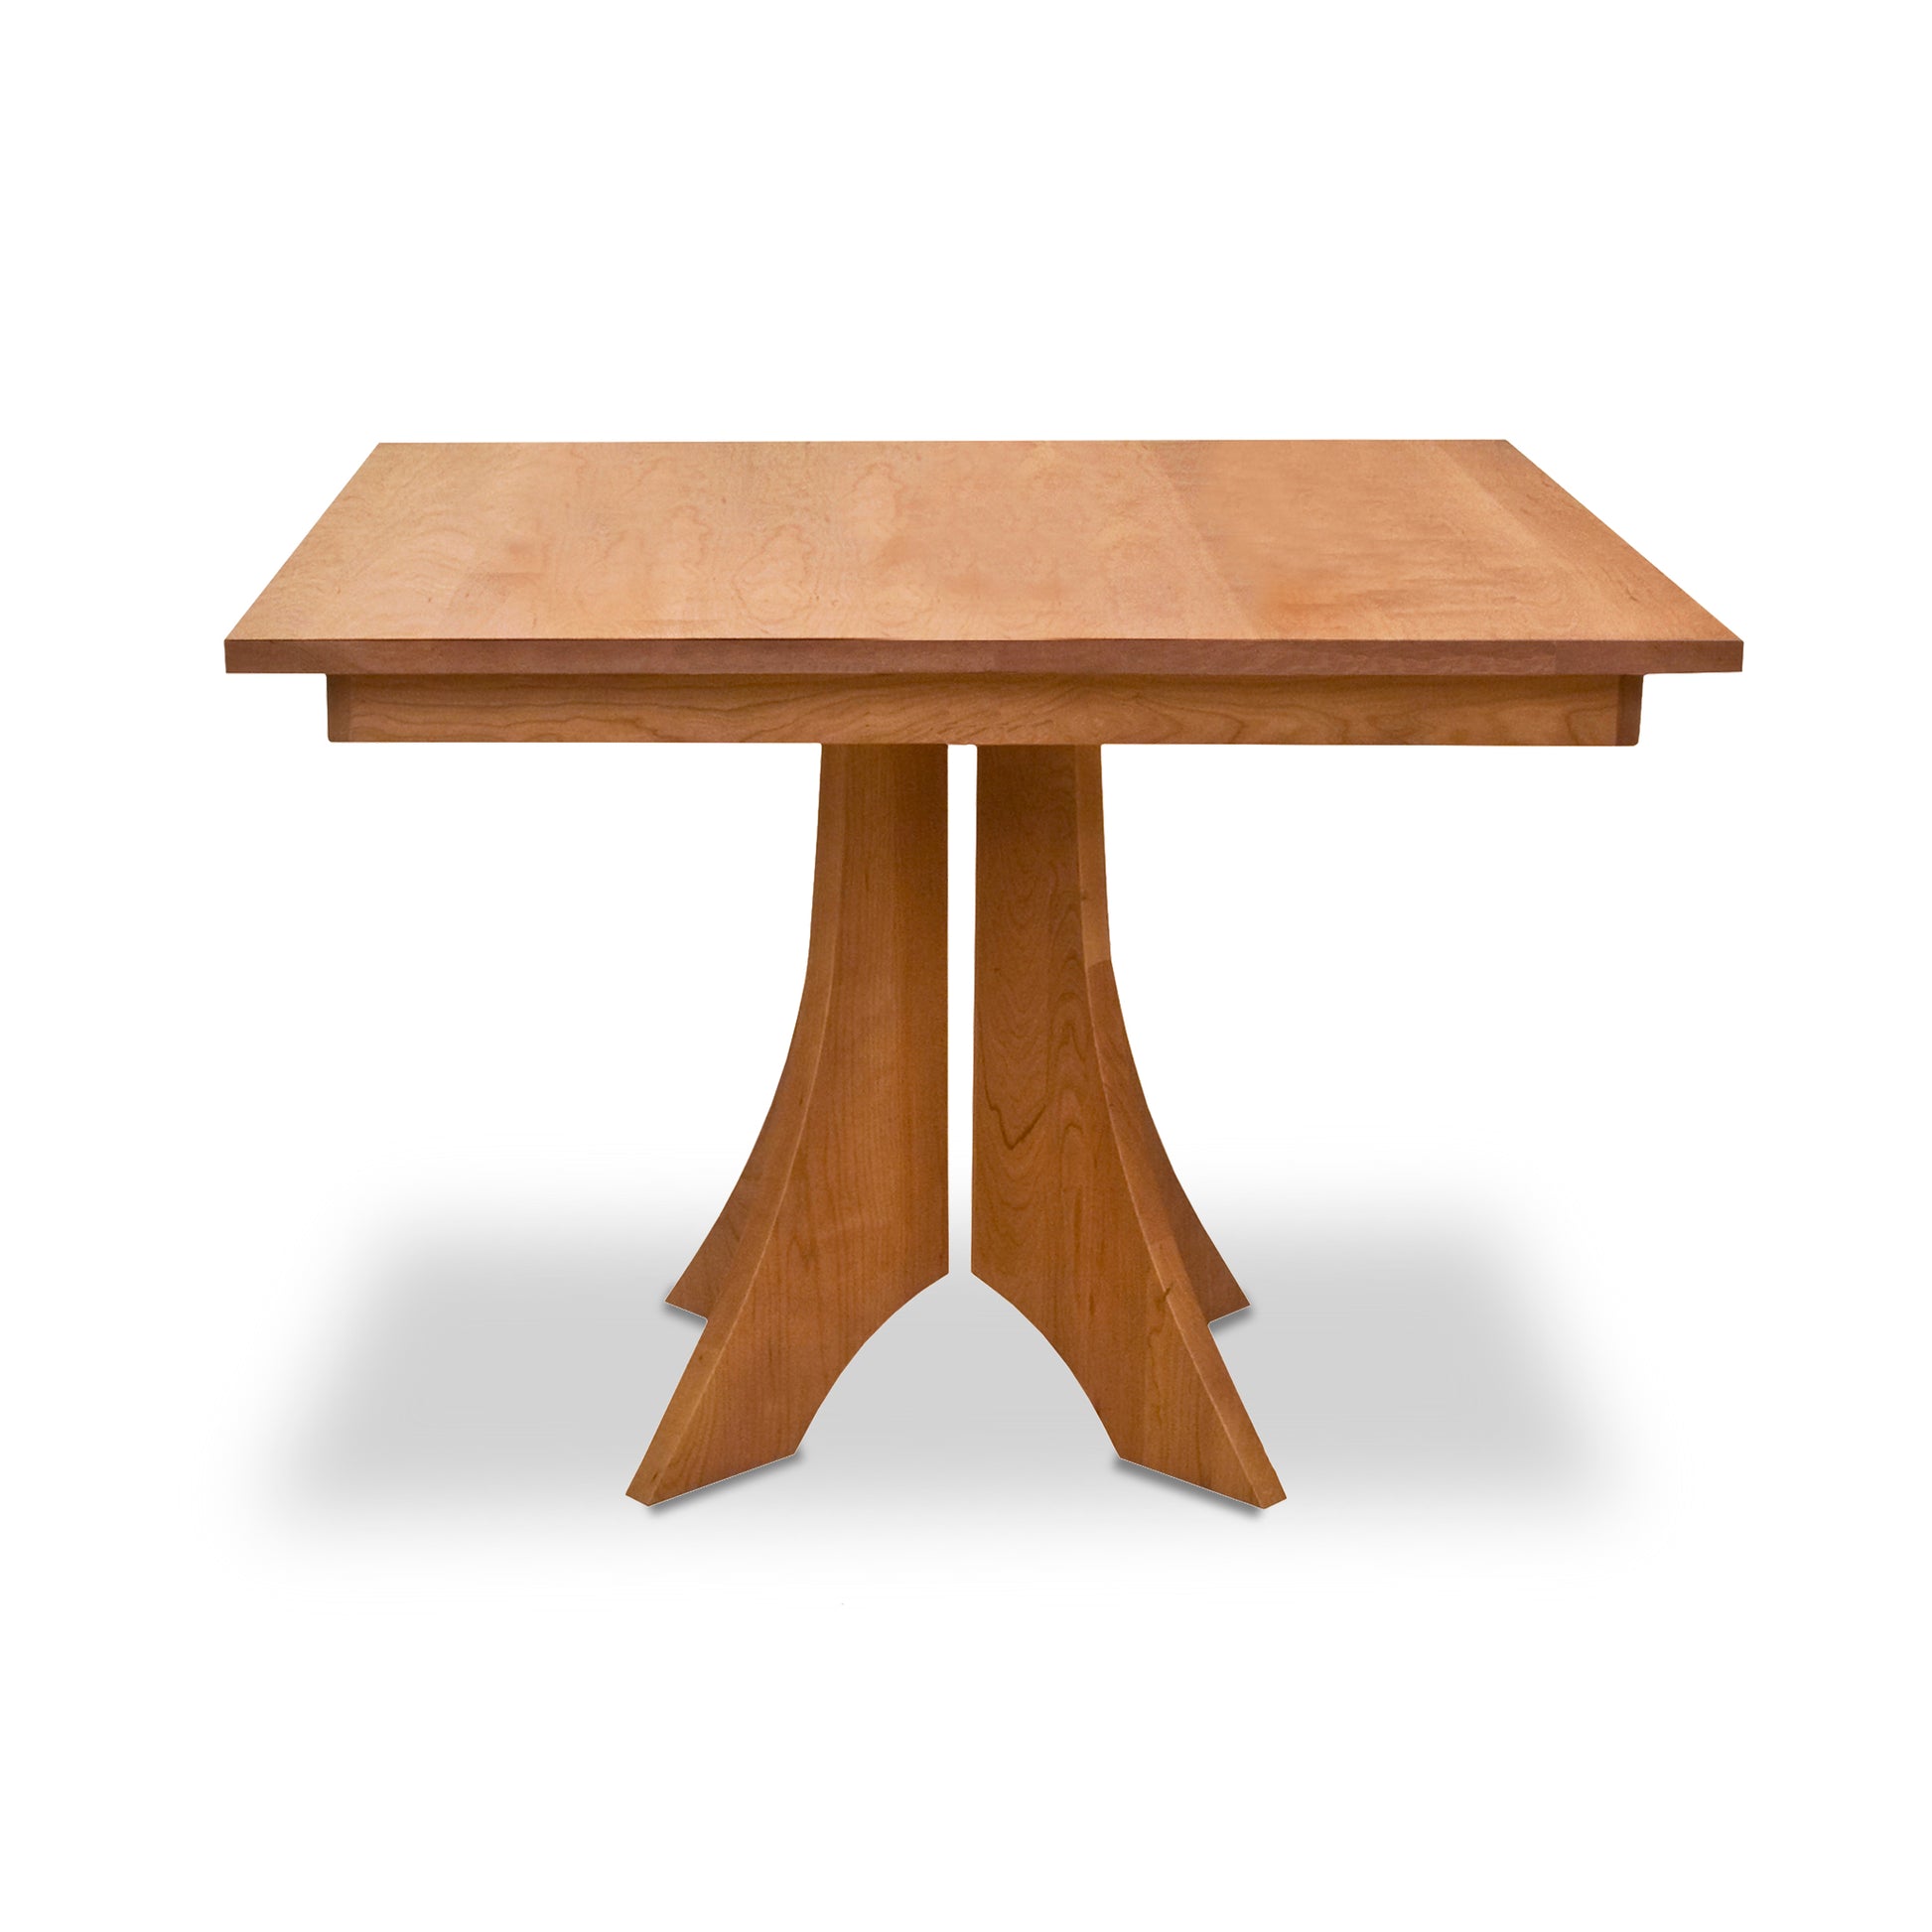 An ultra-durable Hampton Split Pedestal Square Table with a solid wood base by Lyndon Furniture.